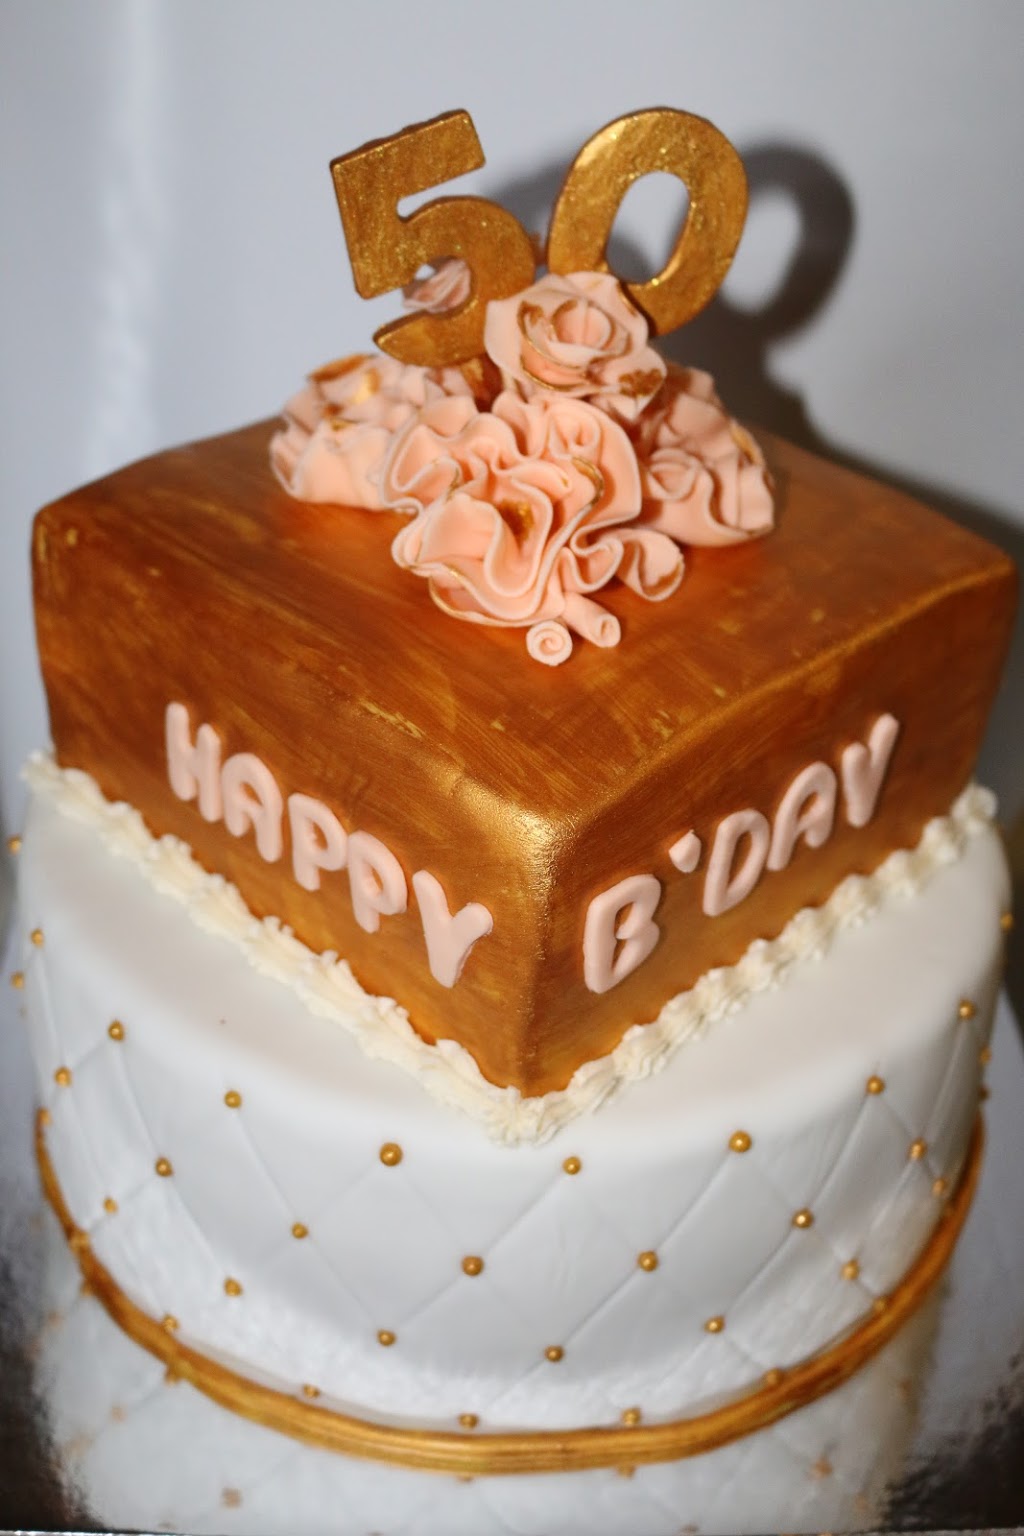 Cakes by Mariena | bakery | 19 Curzon Street, Clyde North VIC 3978, Australia | 0481726556 OR +61 481 726 556